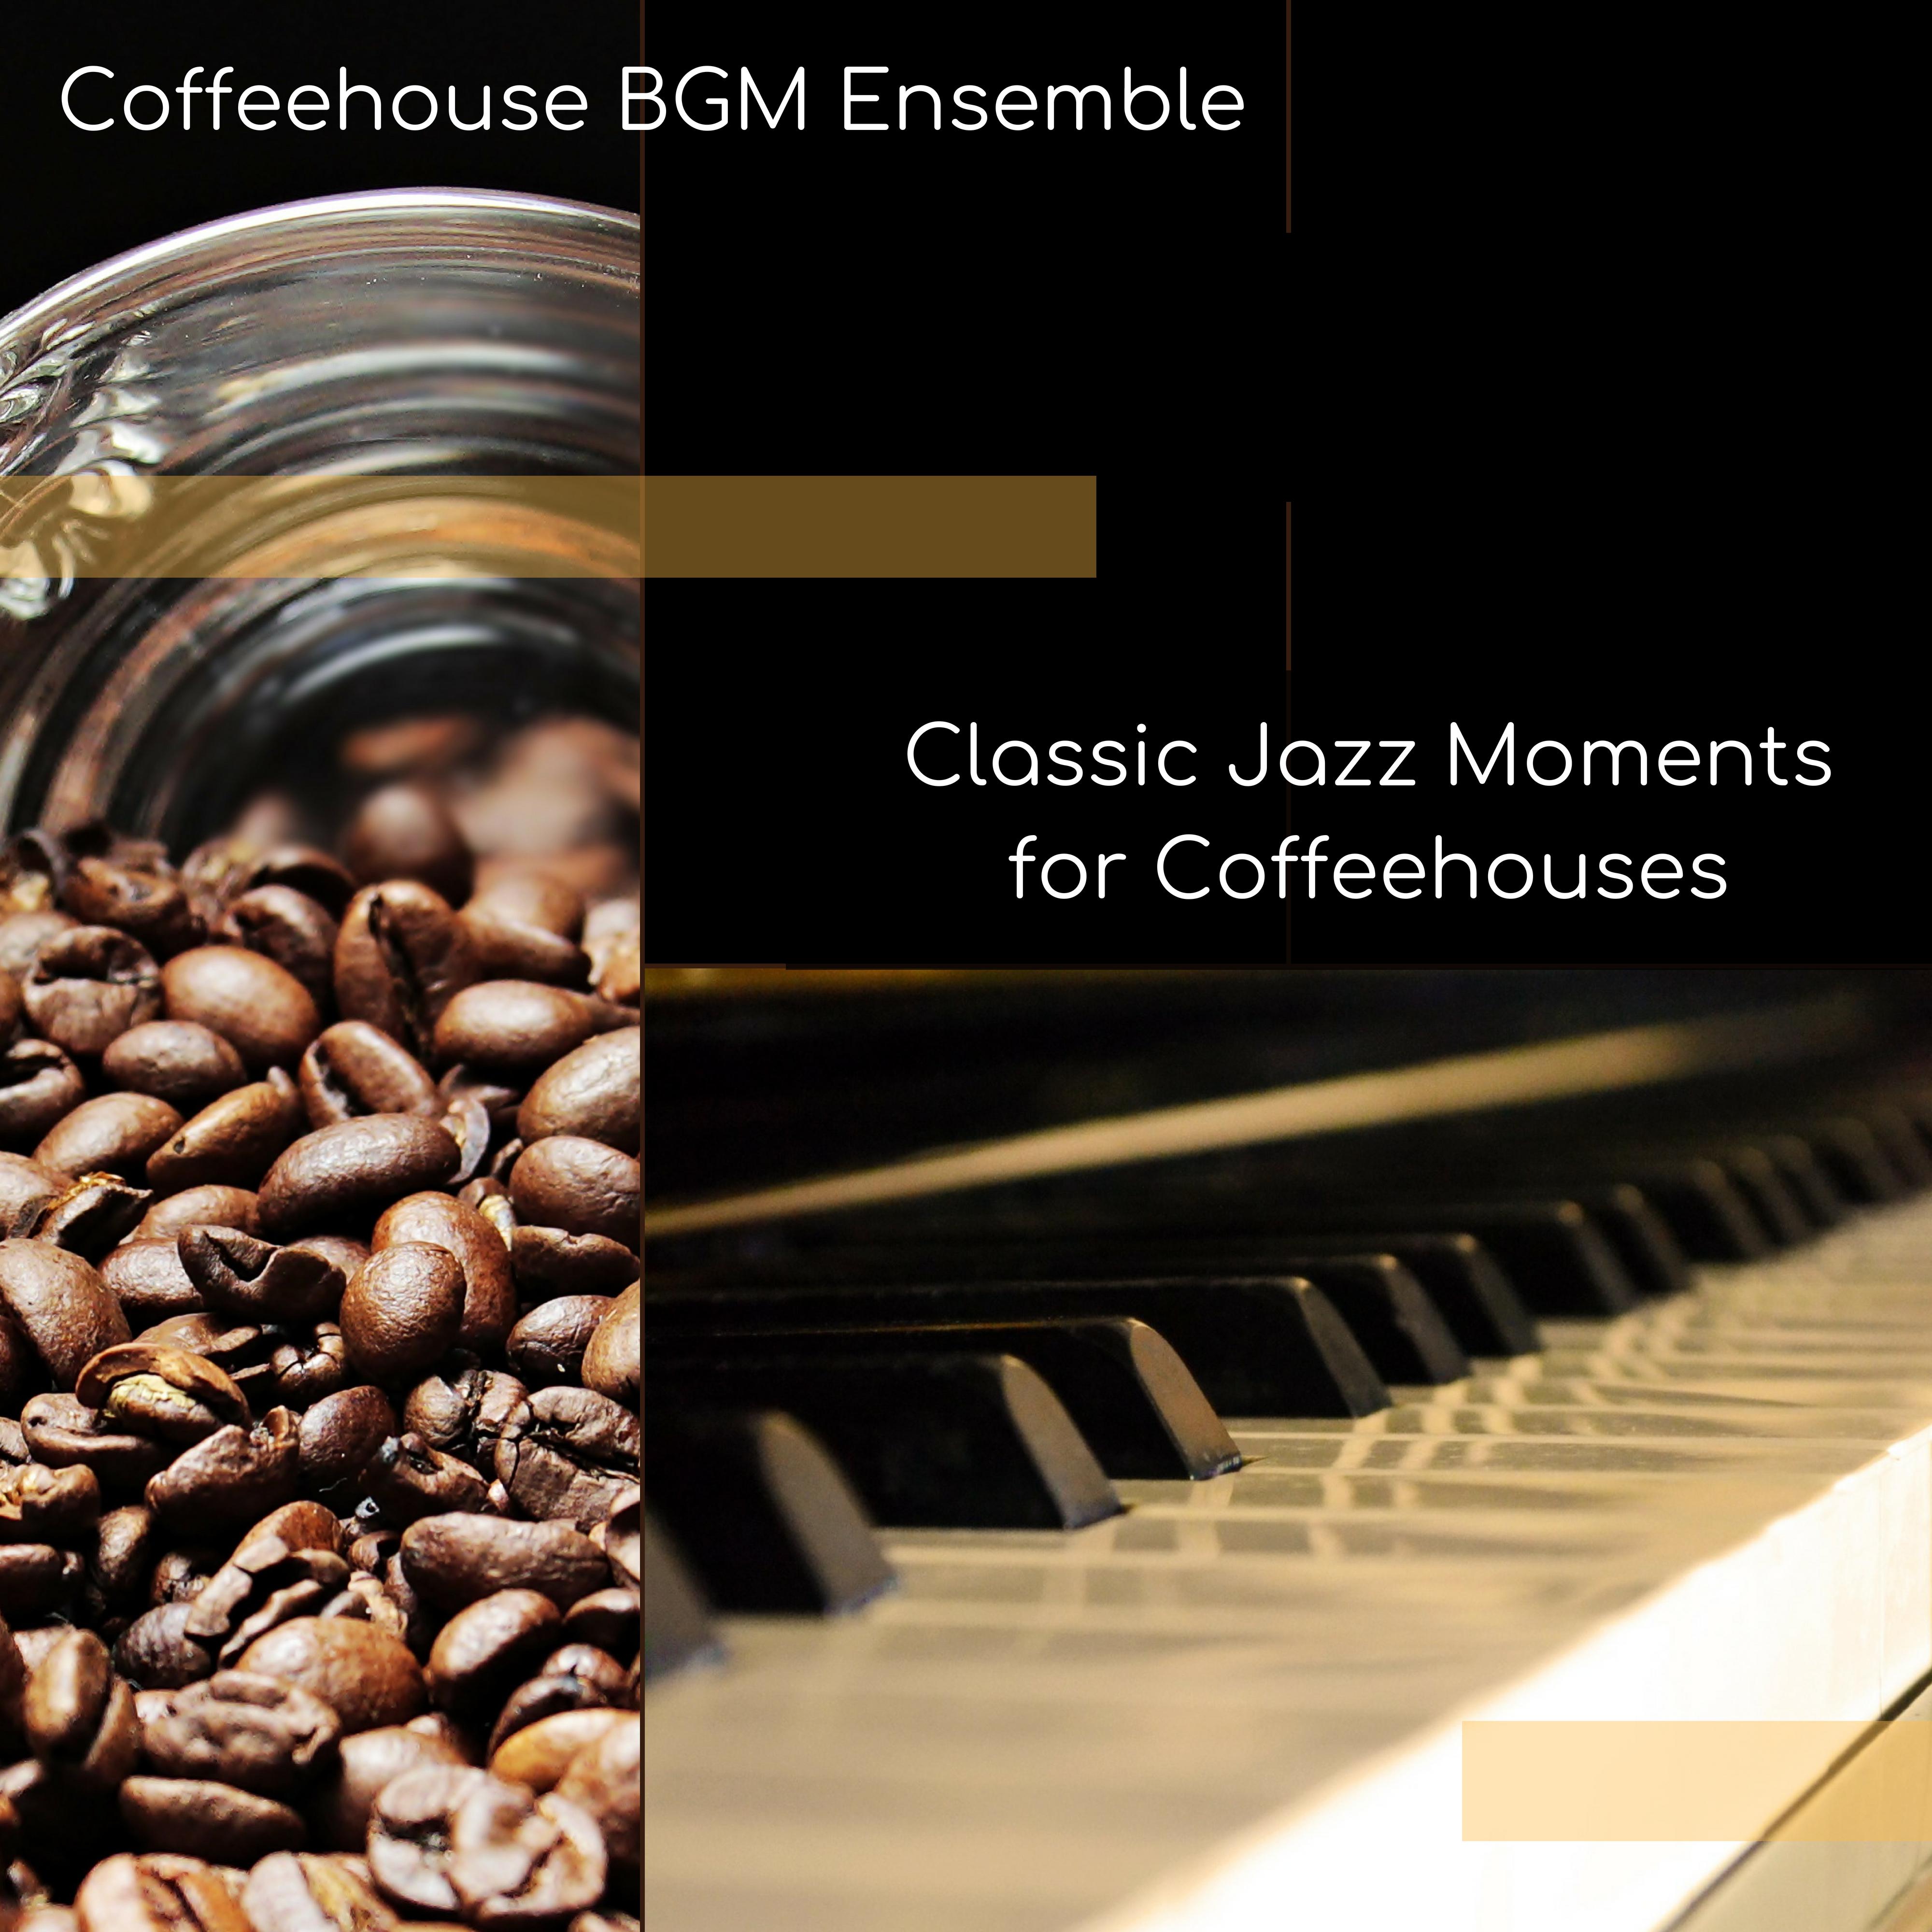 BGM for Coffee and Cake at Coffeehouses